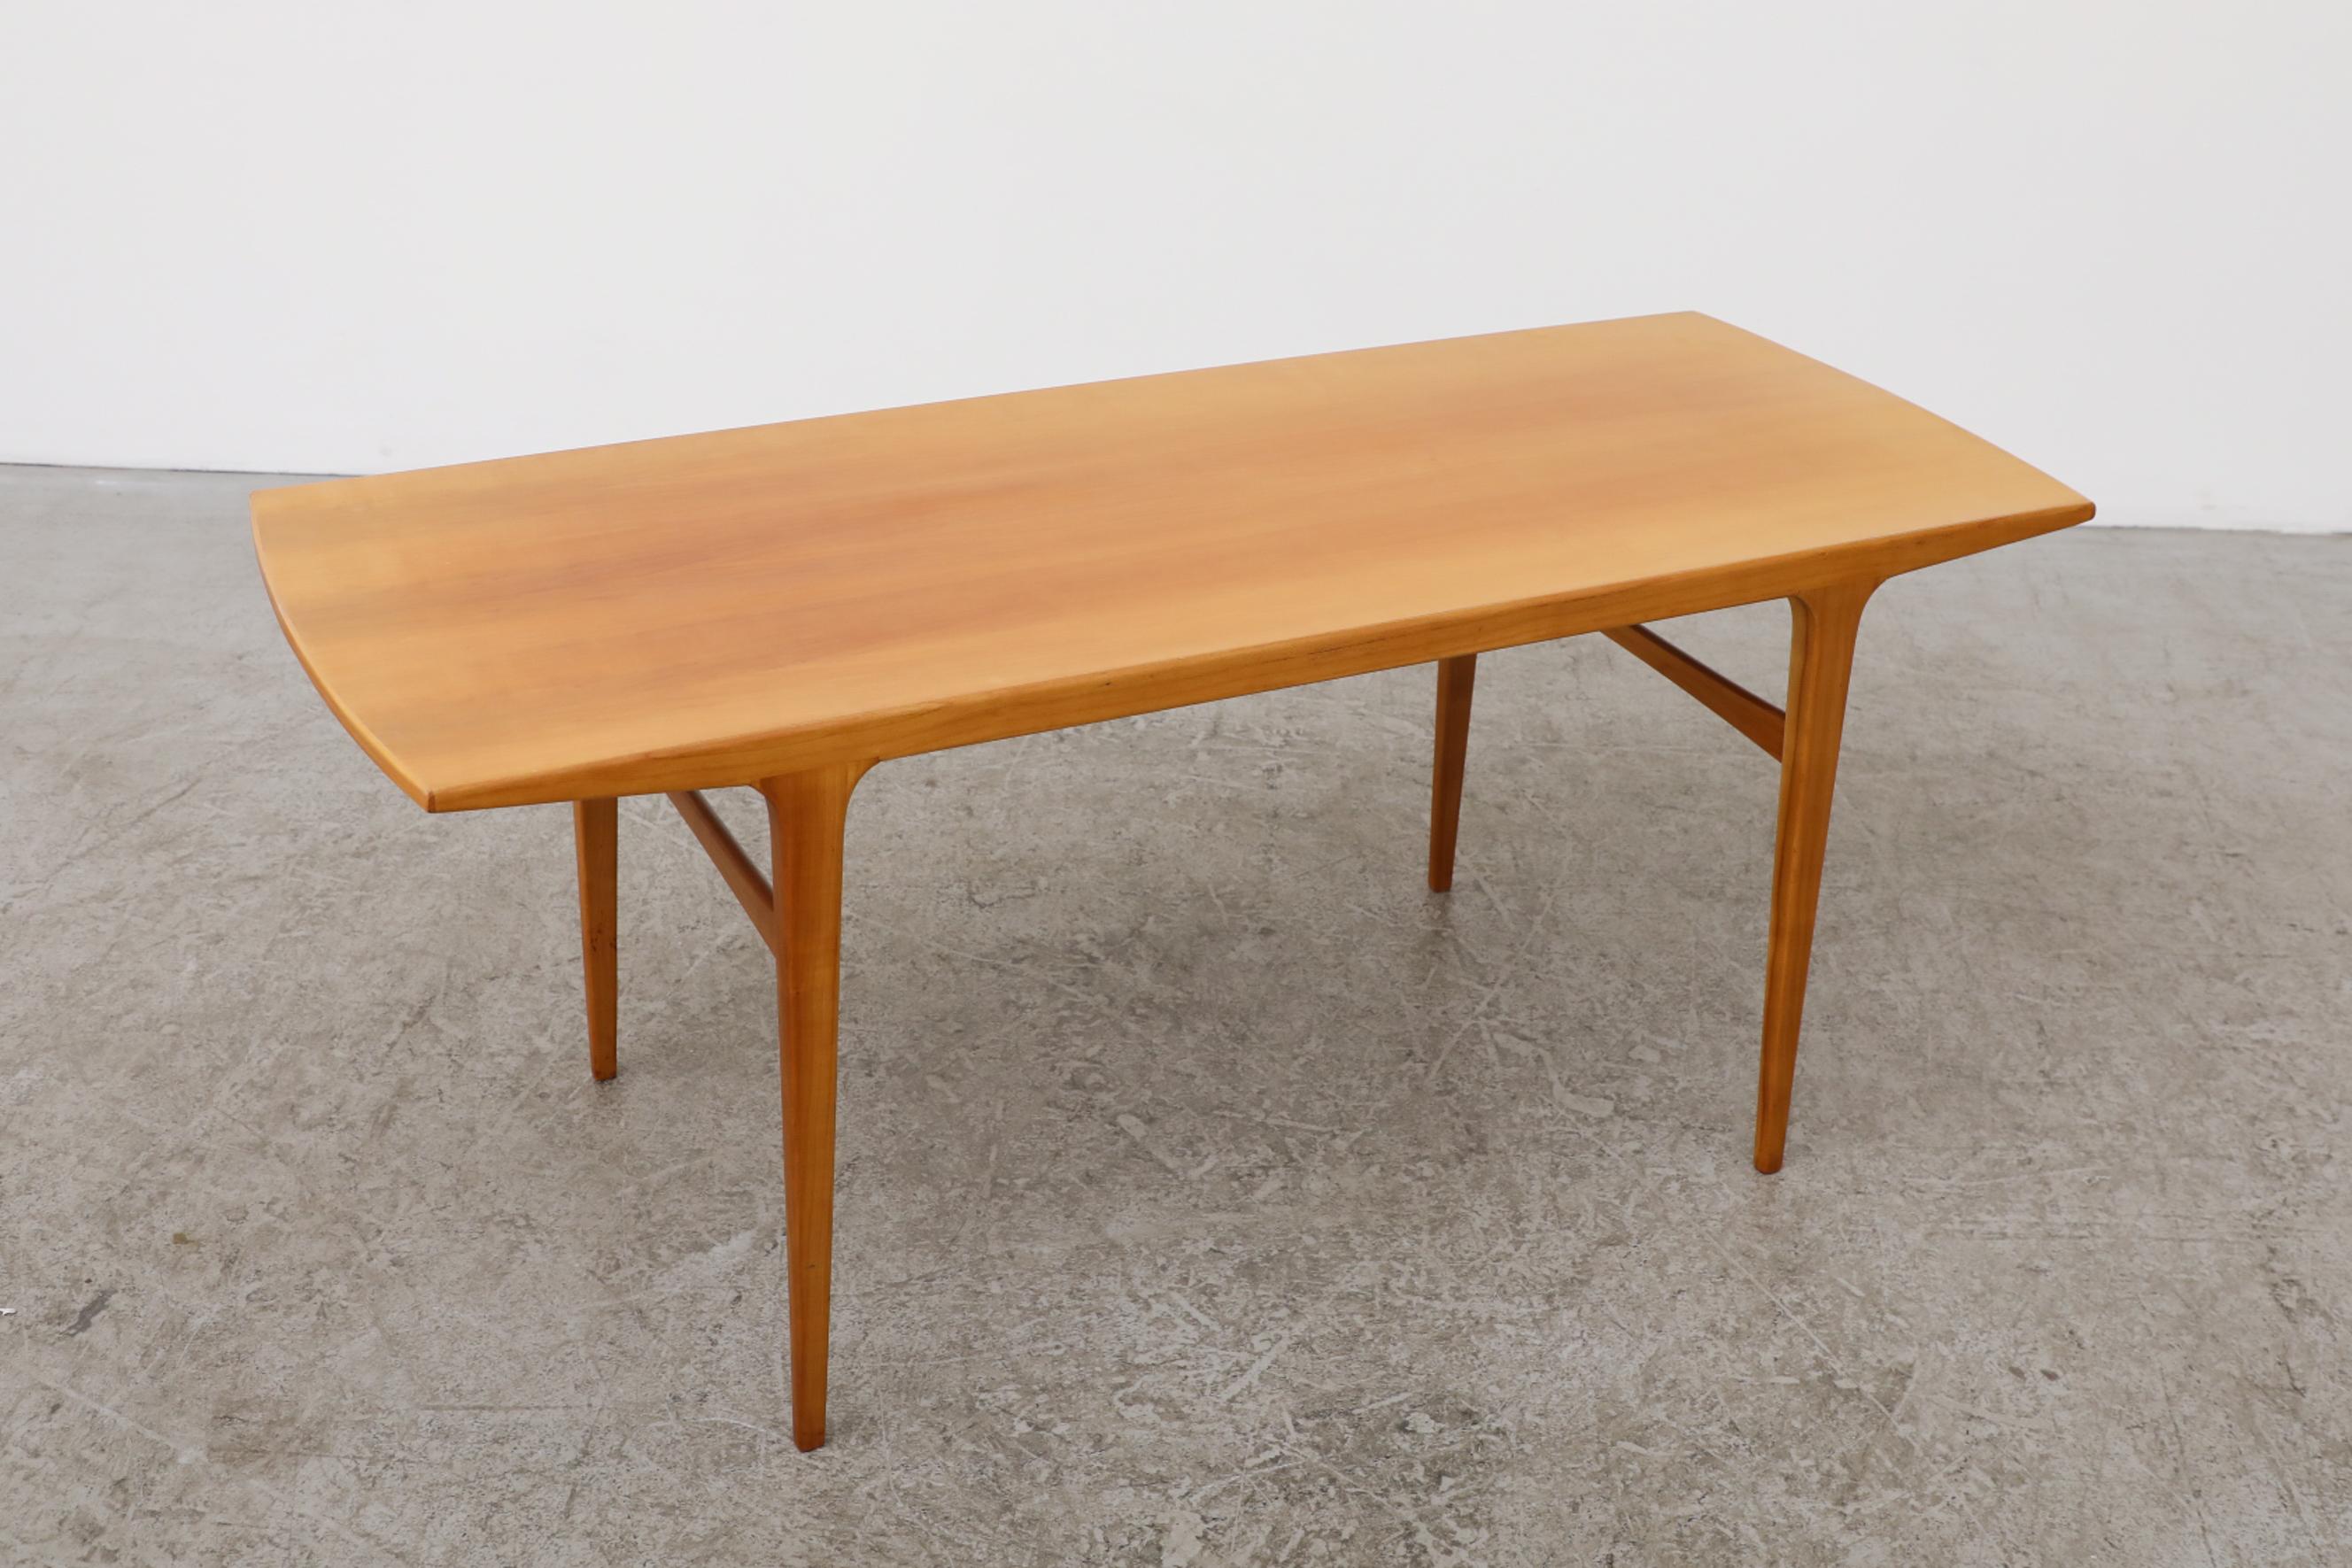 Hickory Sleek Danish Mid-Century Johannes Andersen Style Console Table in Pecan Wood For Sale